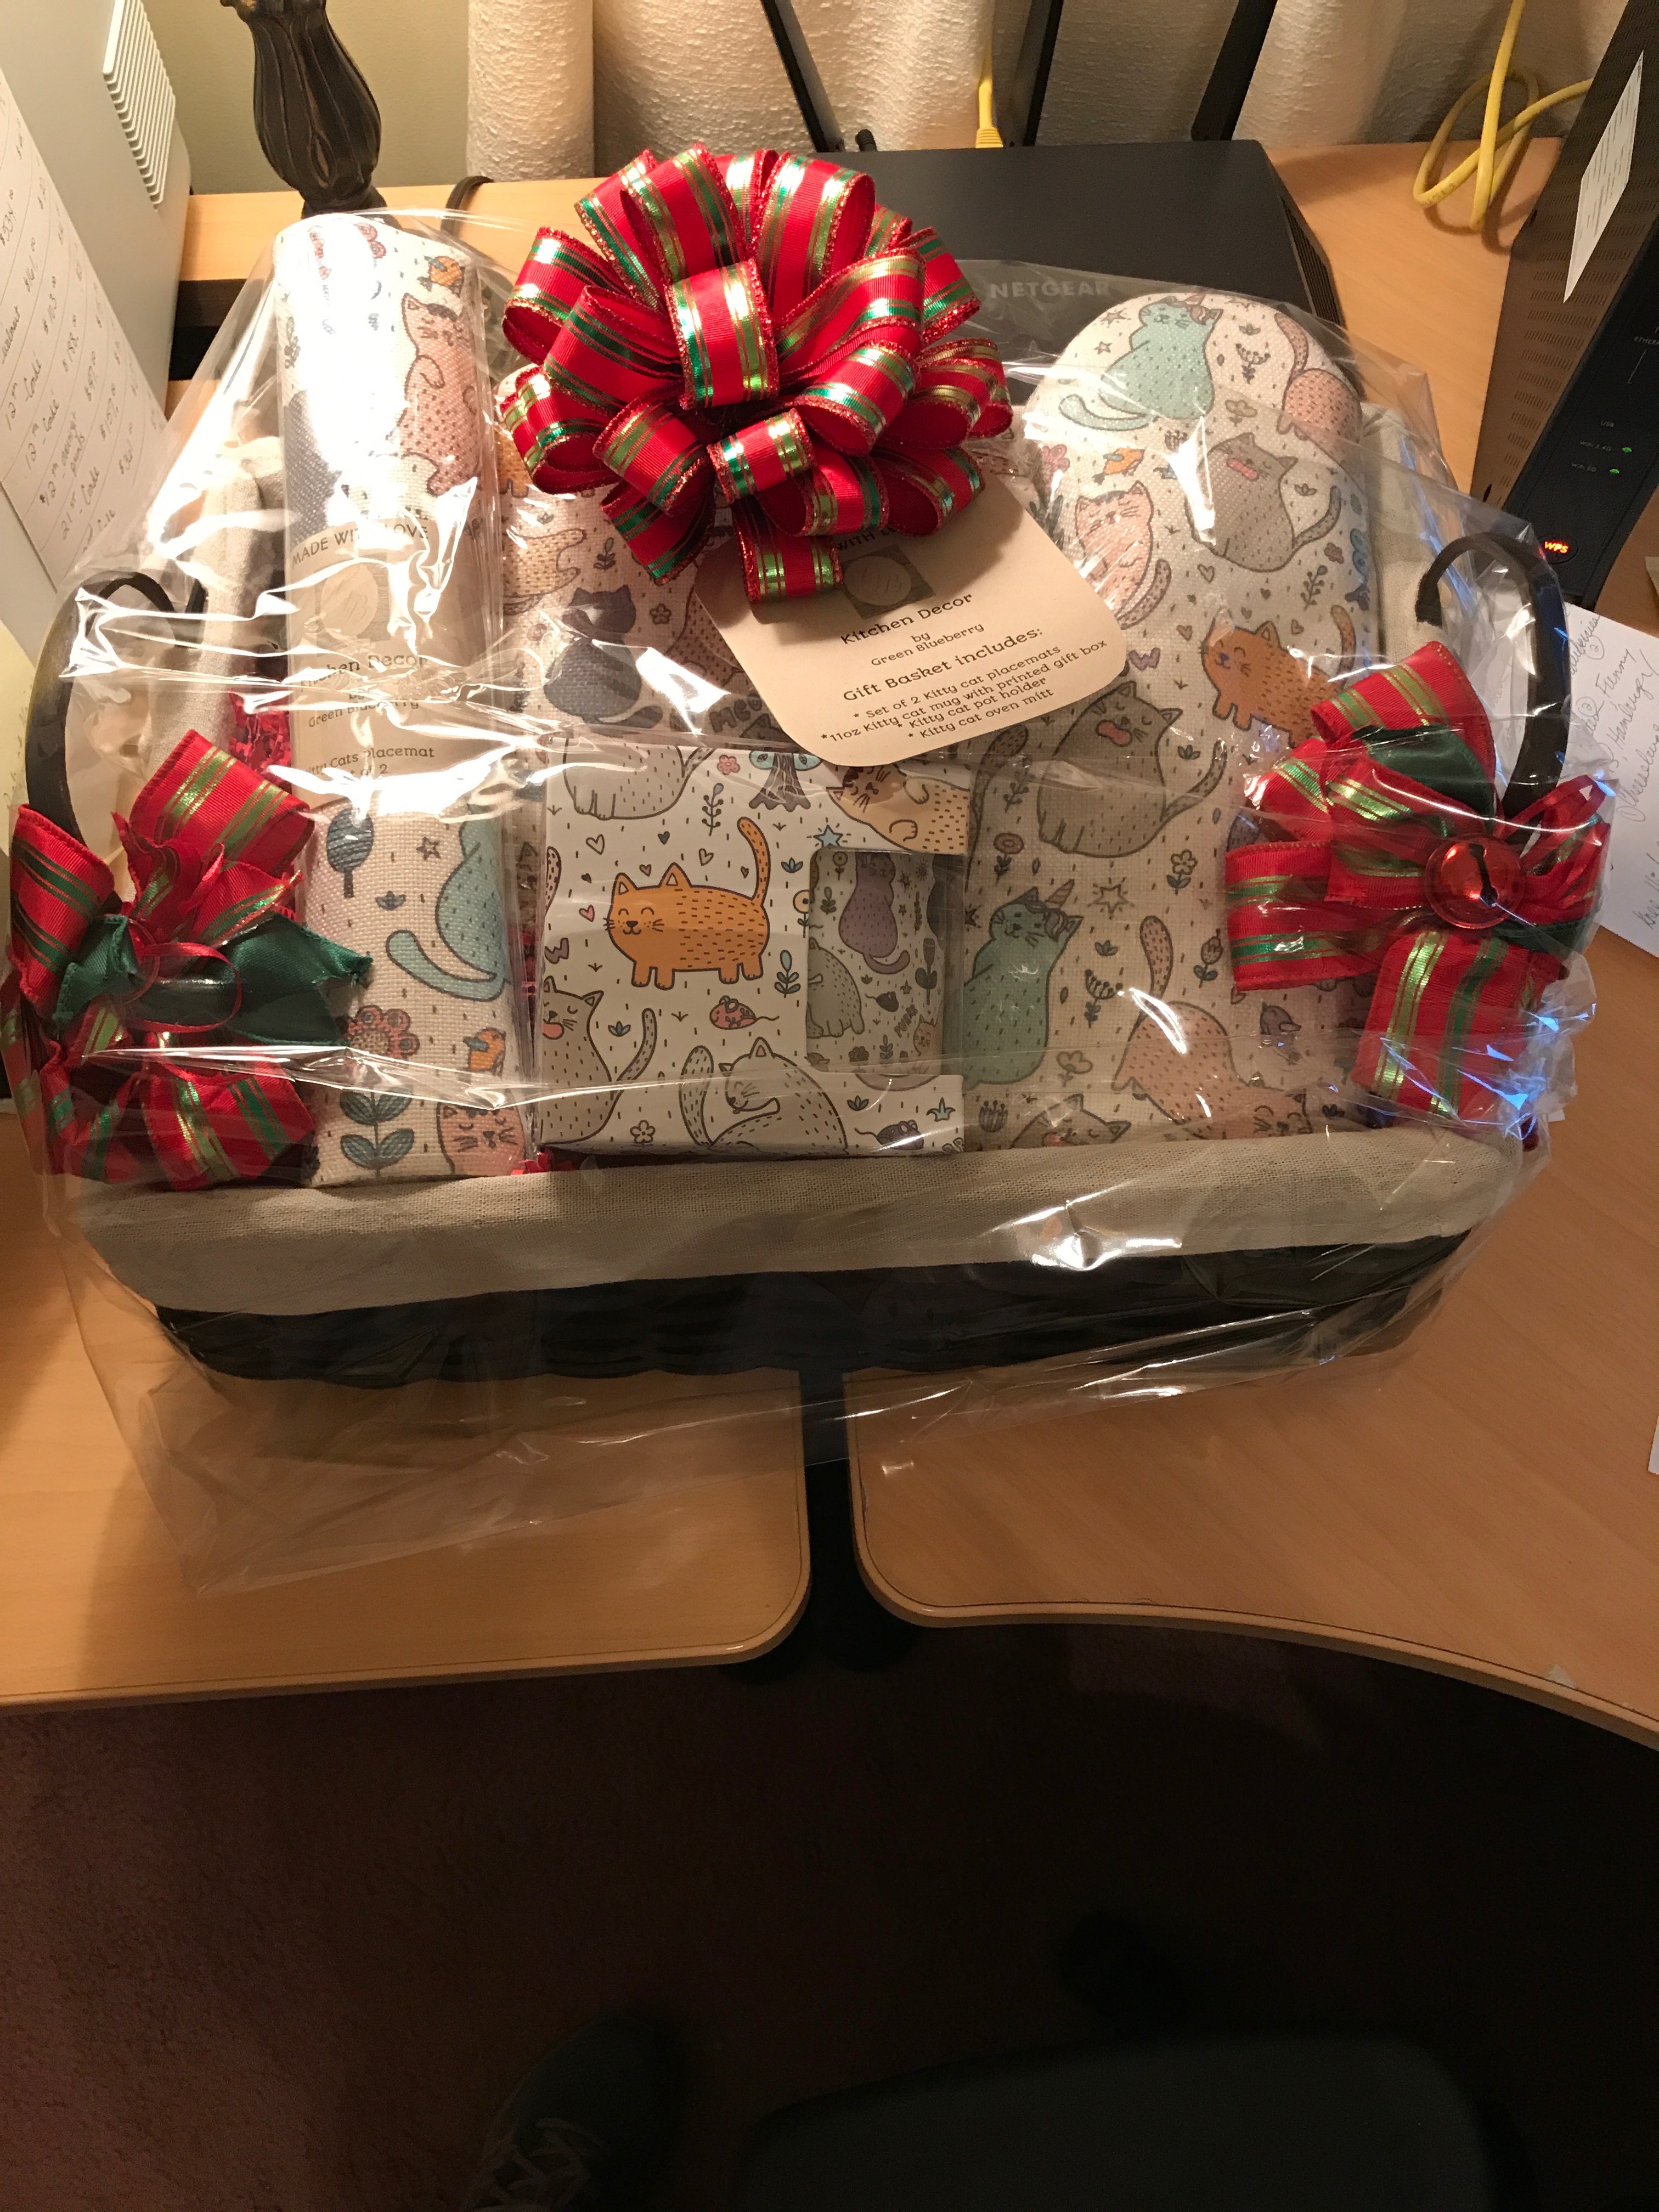 I did this as a donation for my local school PTSA. The gift basket includes a set of linen plac